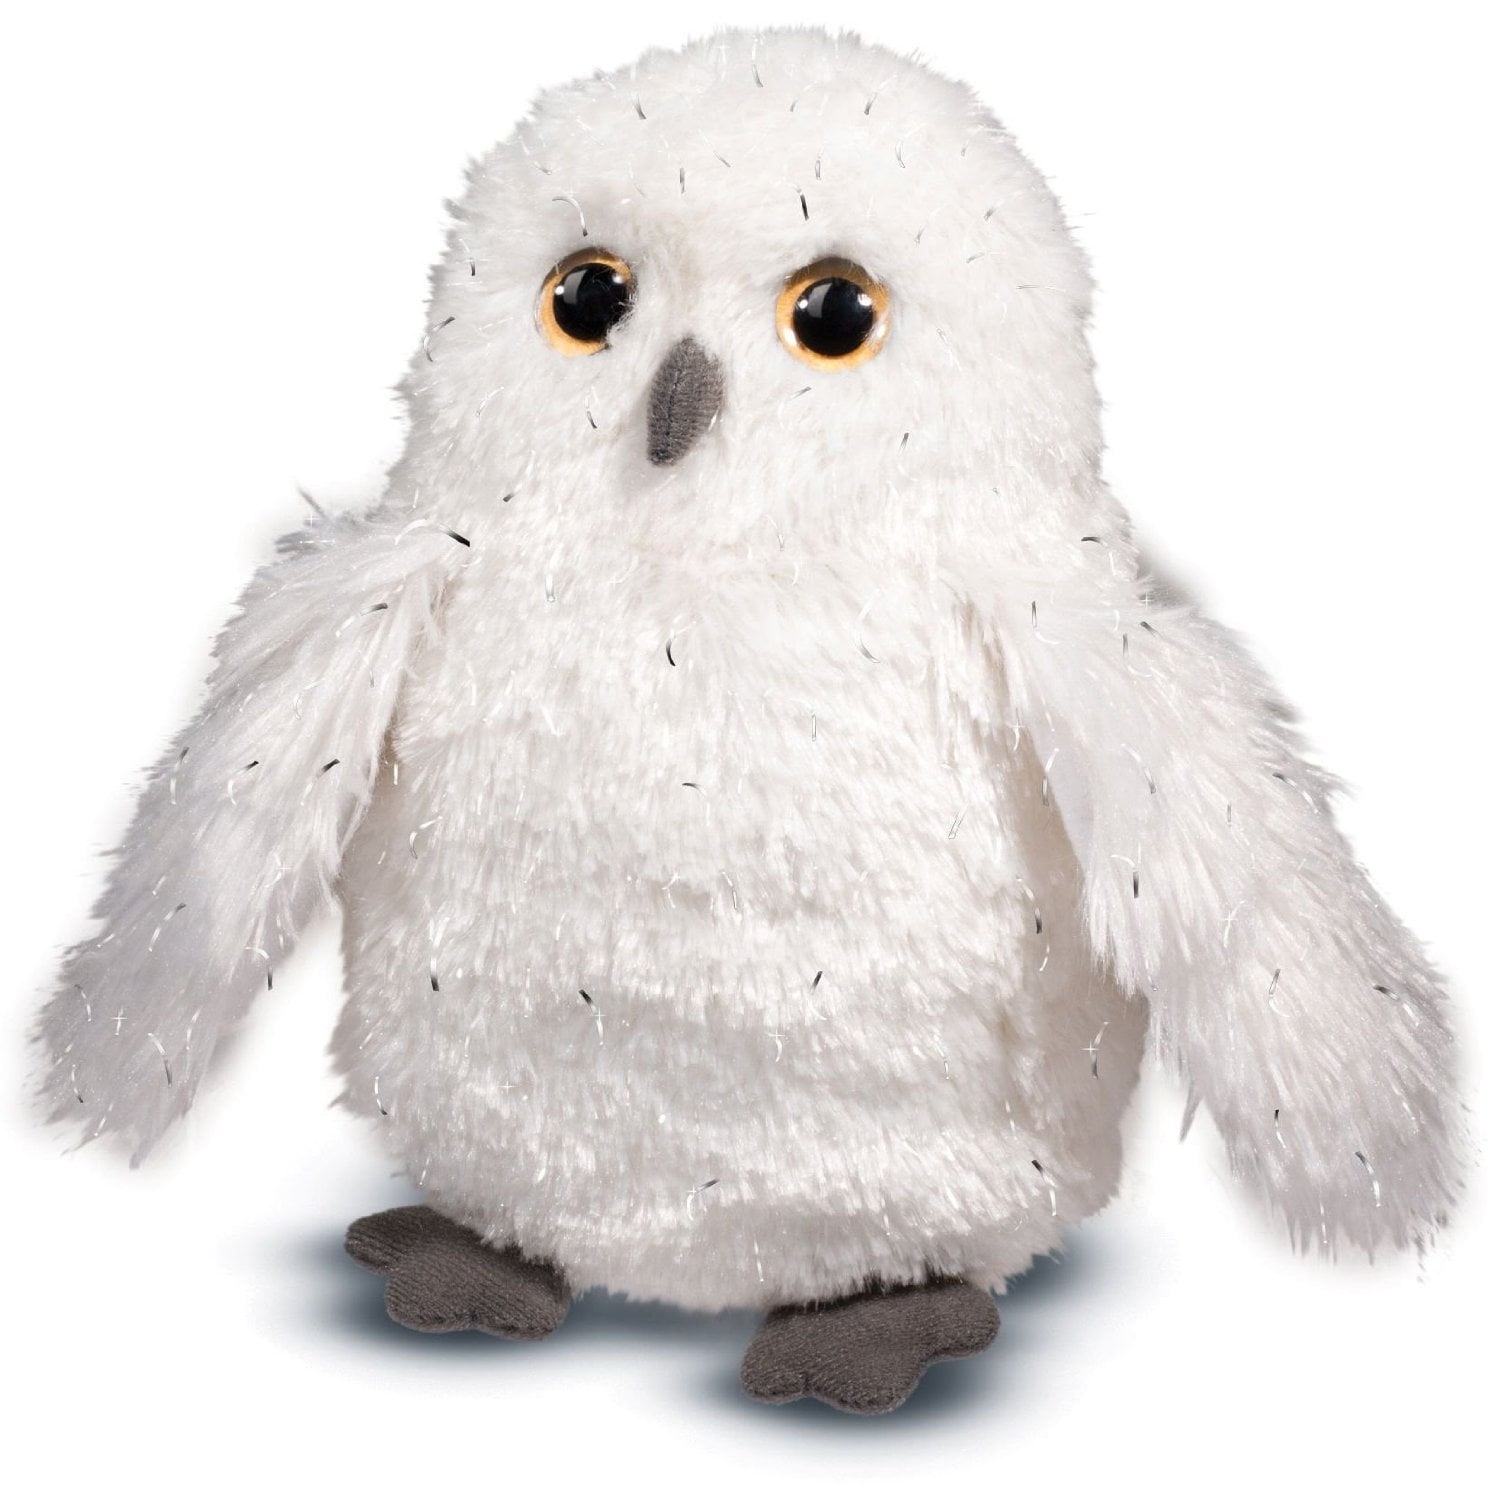 New Preowned Two Plush Snowy The Owl Toy Stuffed Animal 12" 